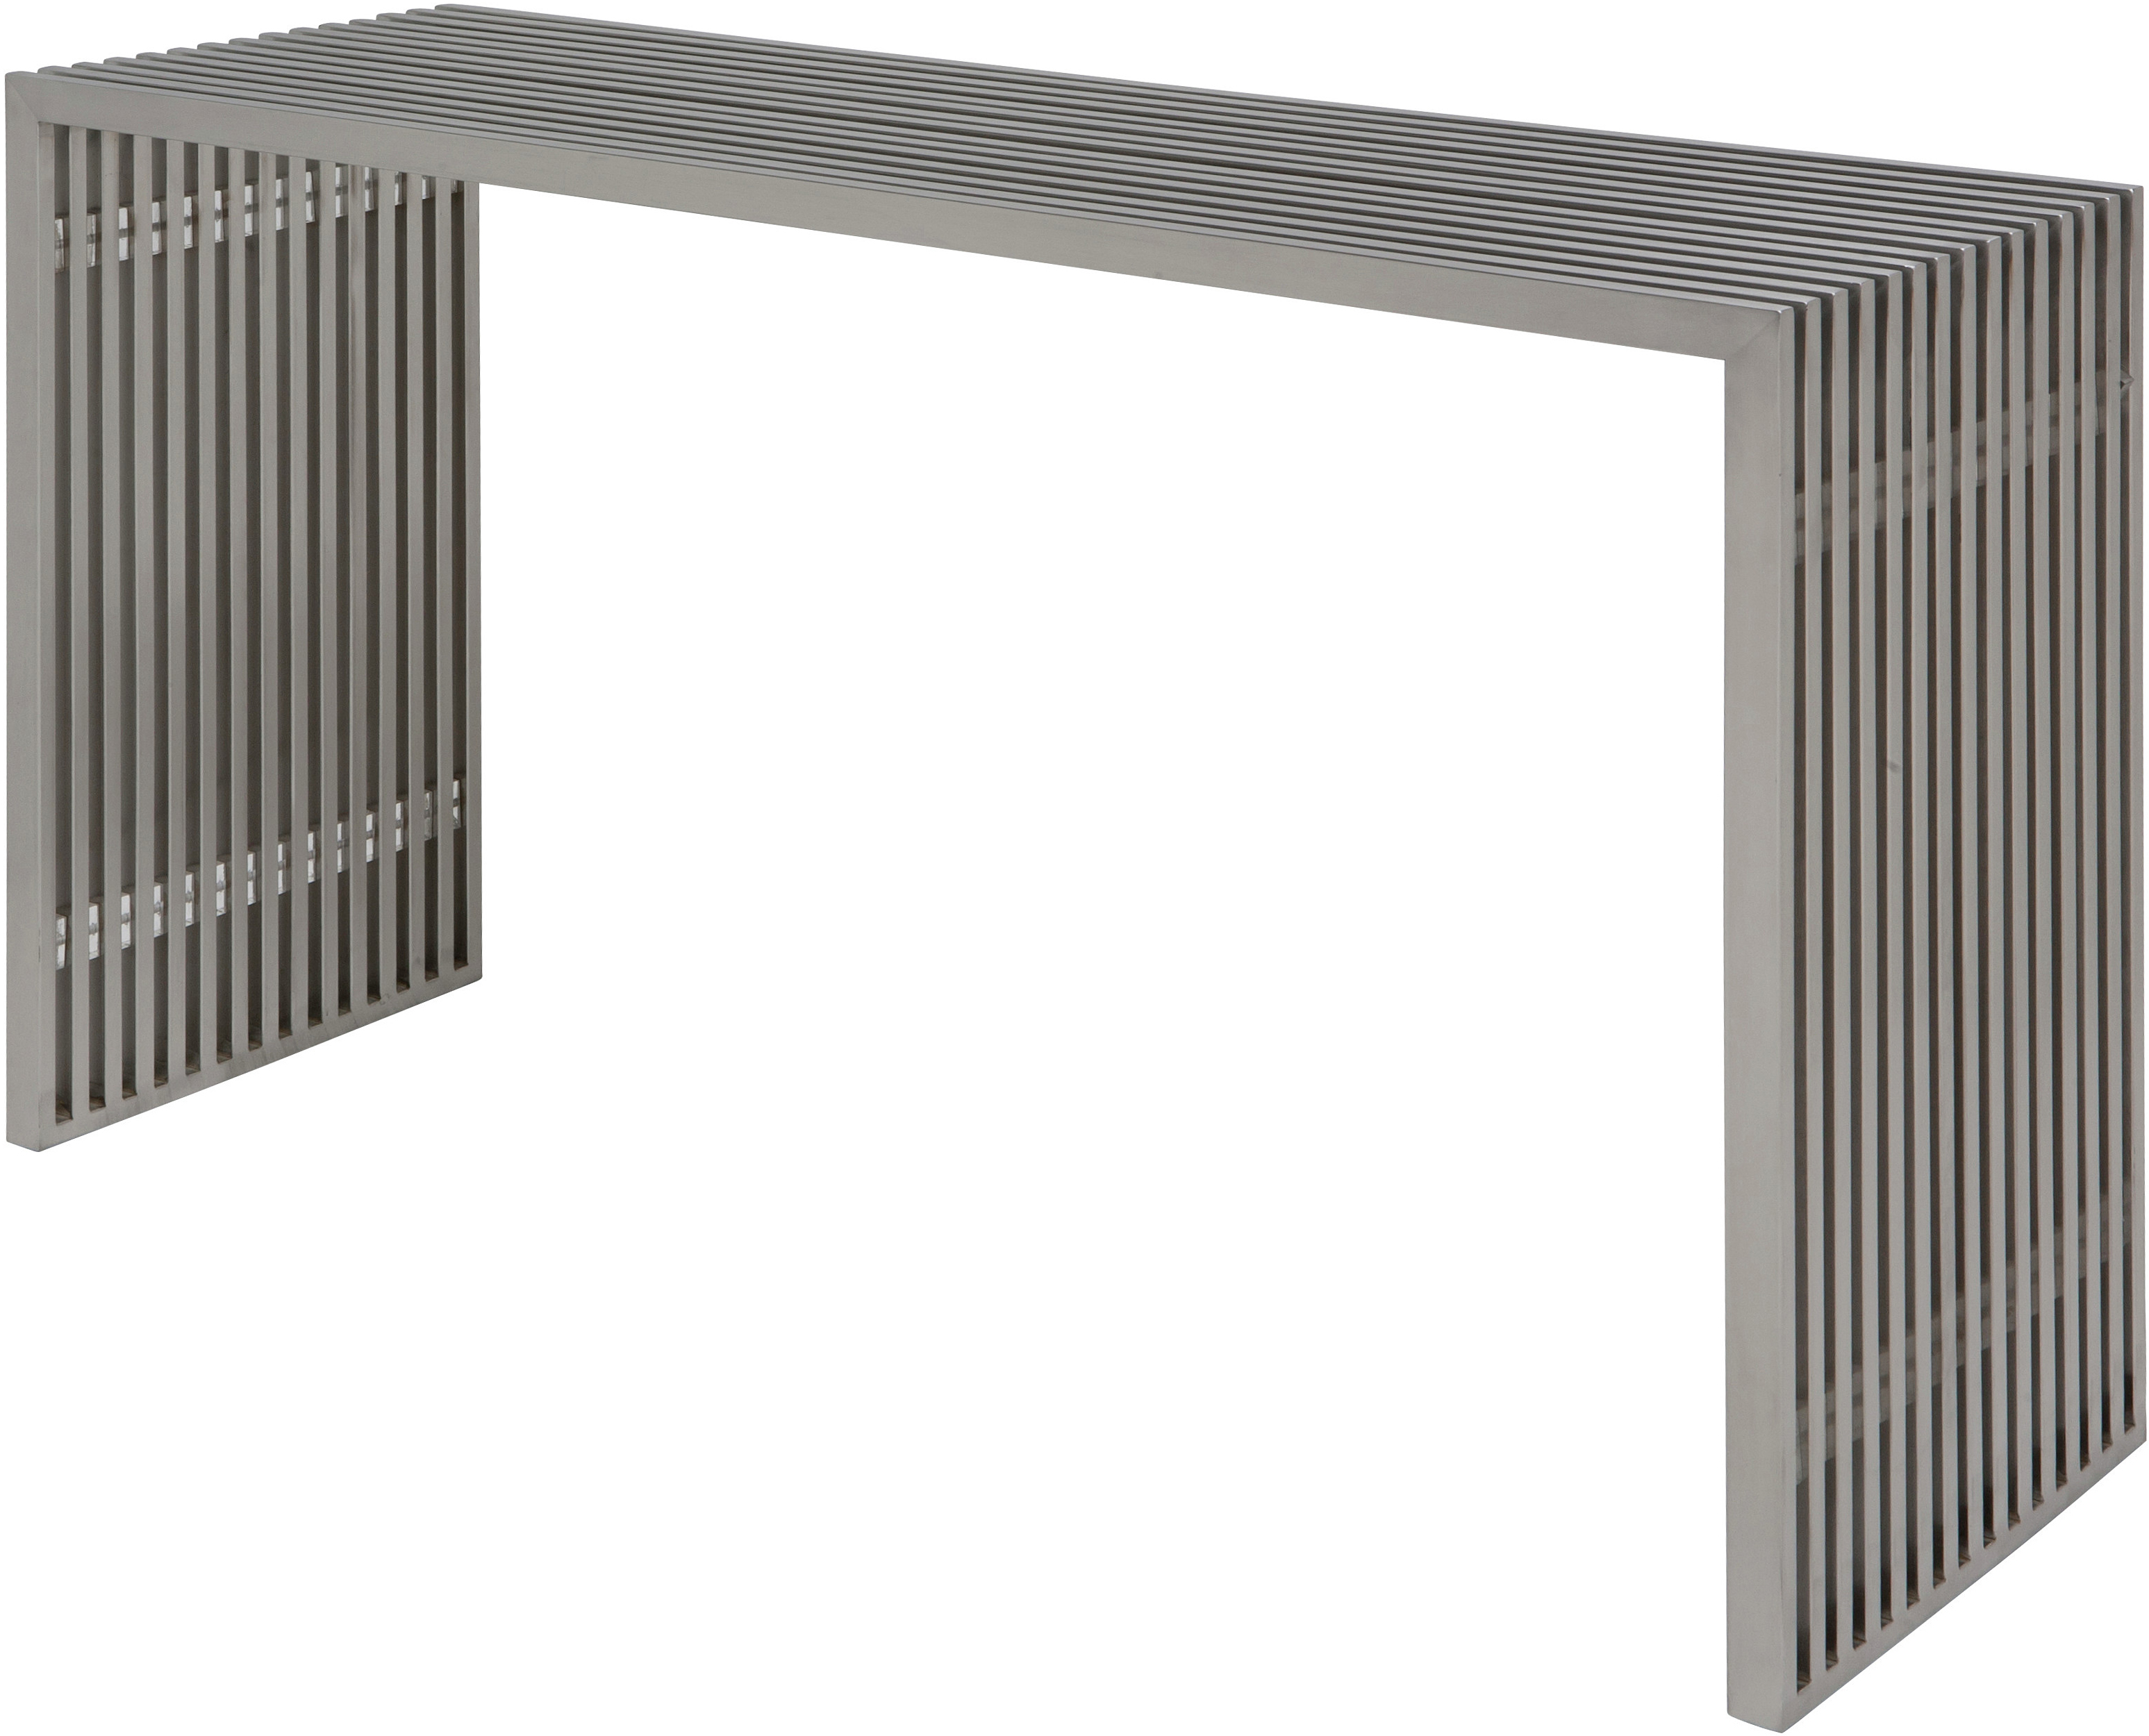 the amici console in stainless steel